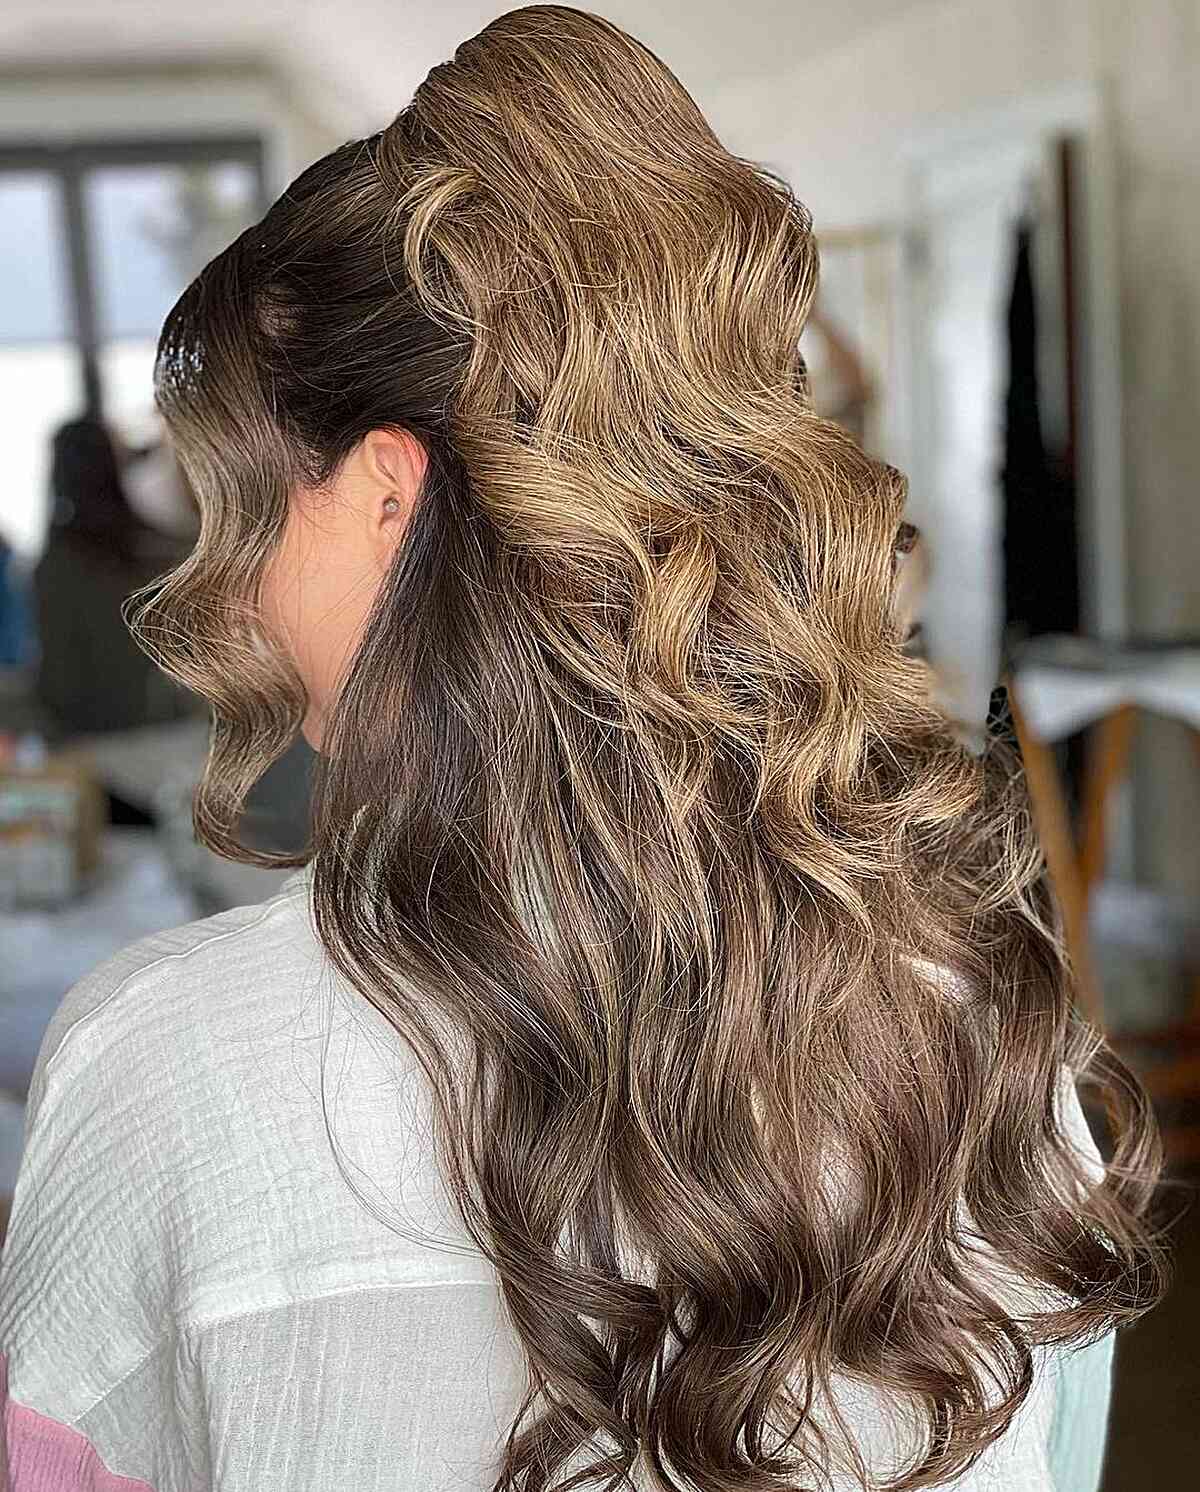 Double Flip Half-Up Ponytail for Wedding Guests with Mid Back-Length hair